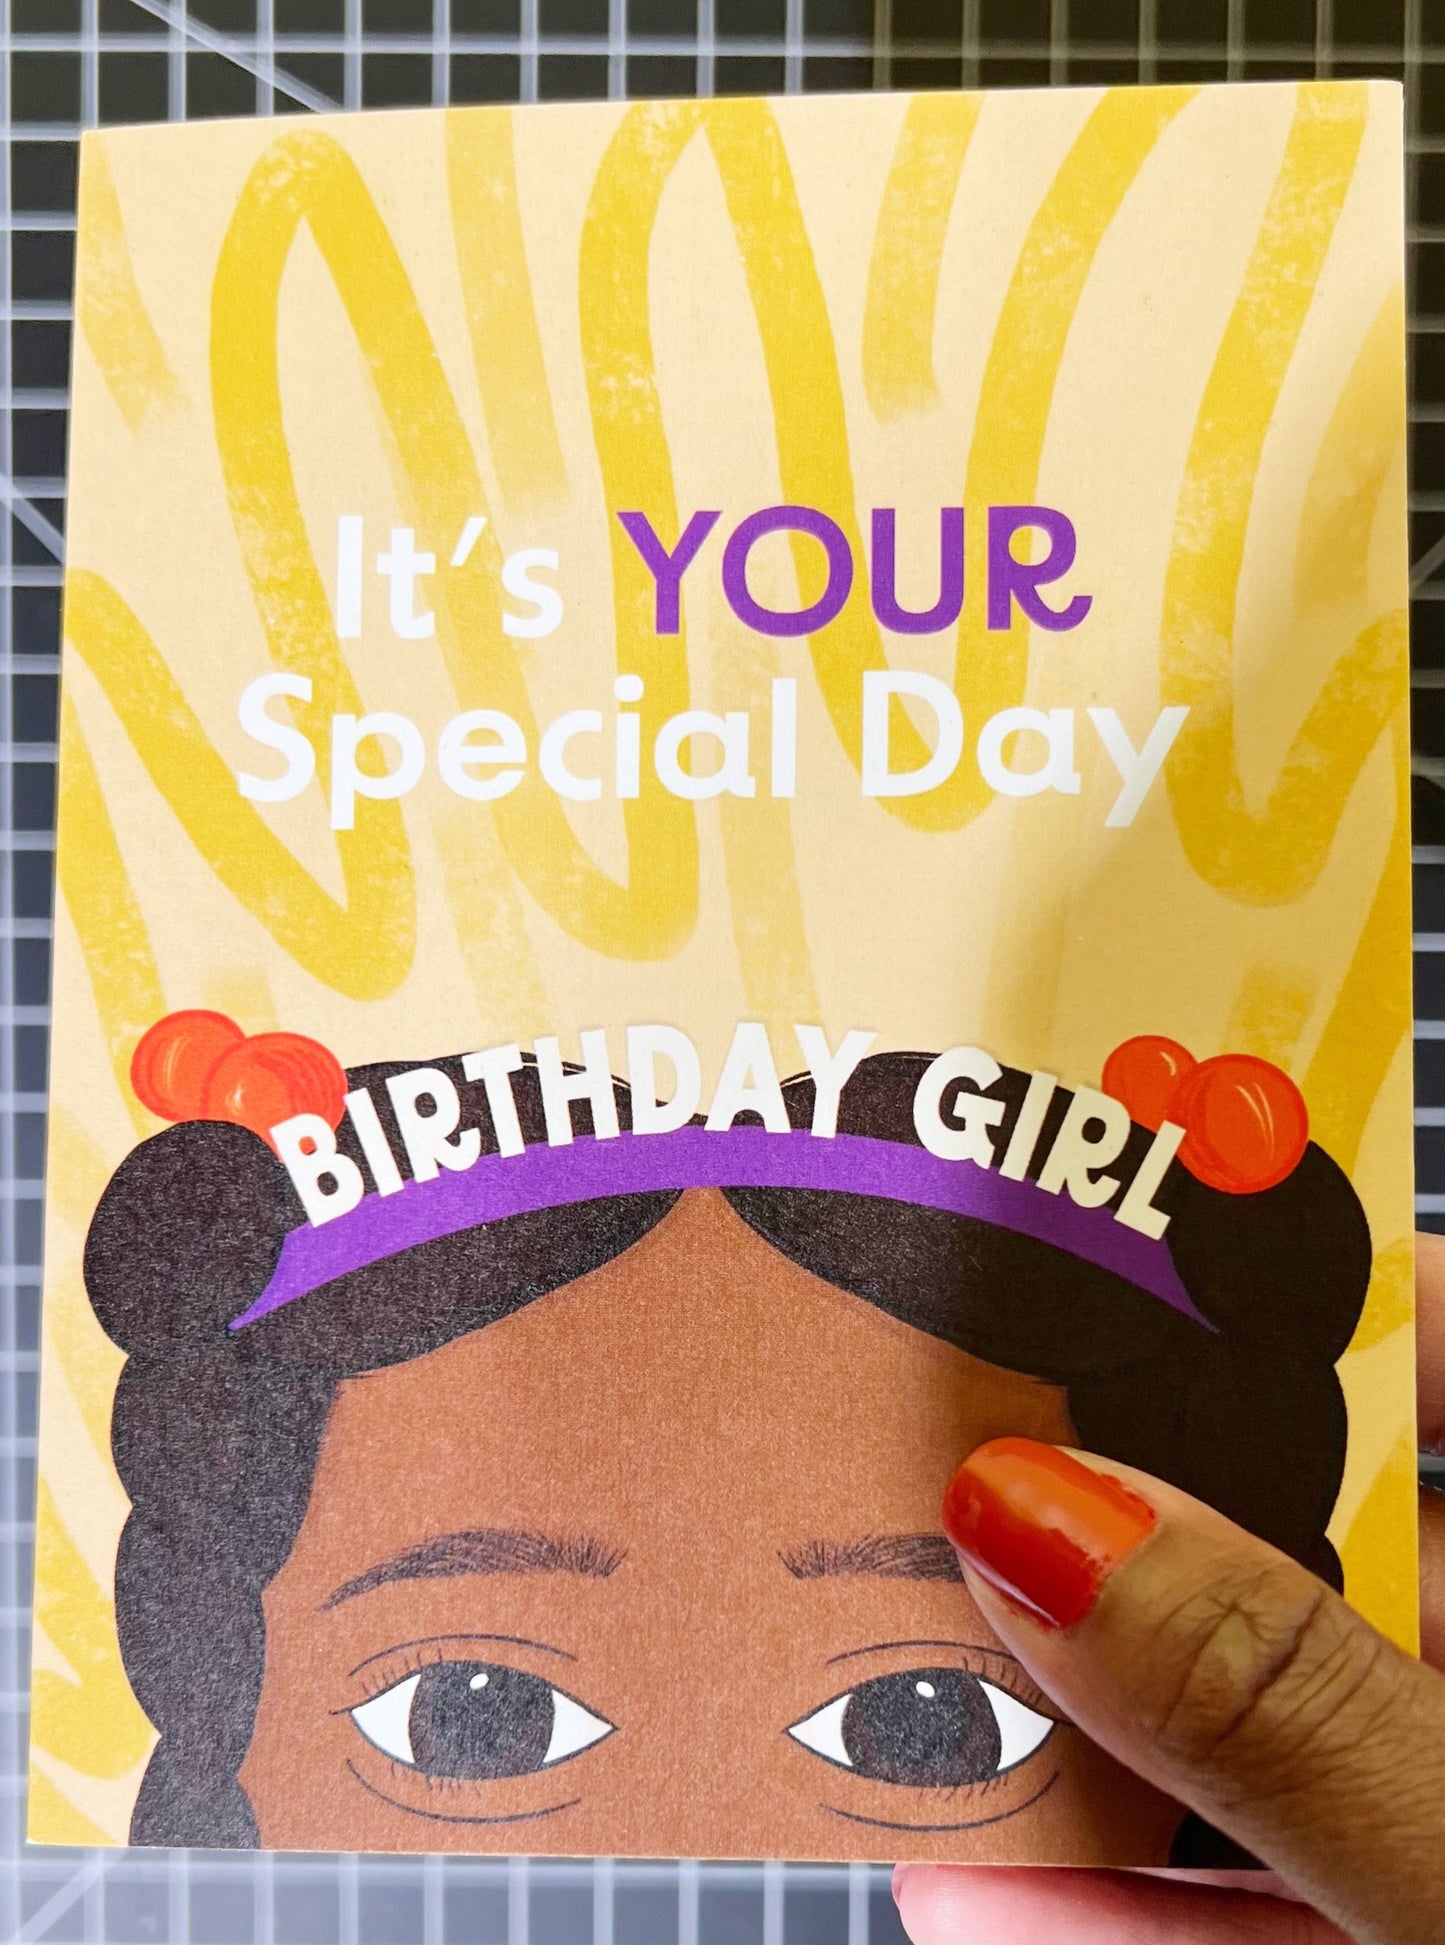 Birthday Girl 4.25x5.5”, celebrate, birthday card for little girls, cards for Black Girls, brown girl greeting cards from Goods Made By Digitrillnana, Ashley Fletcher. Black Woman Owned. Perfect card for a birthday gift!